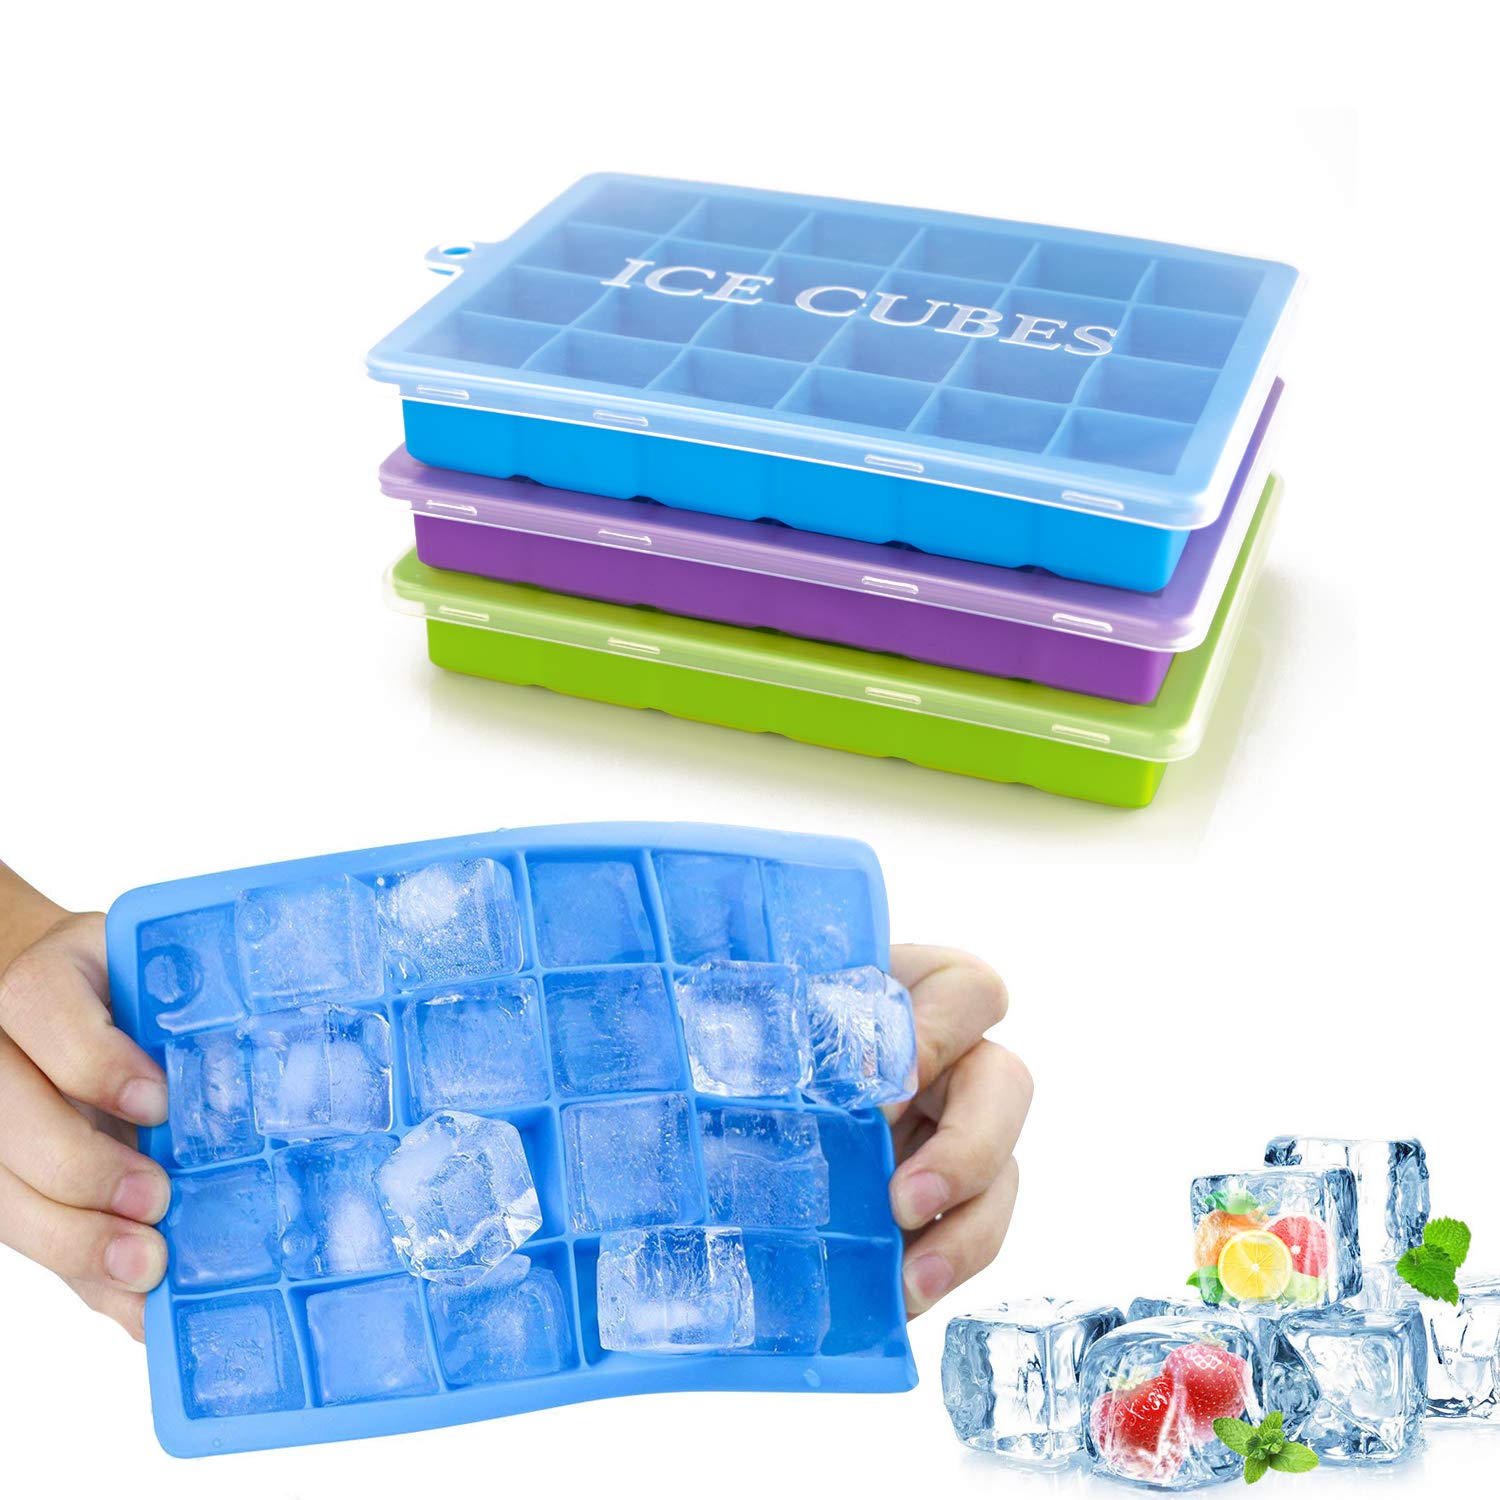 Morfone Silicone Ice Tray With Lids, 3-Pack